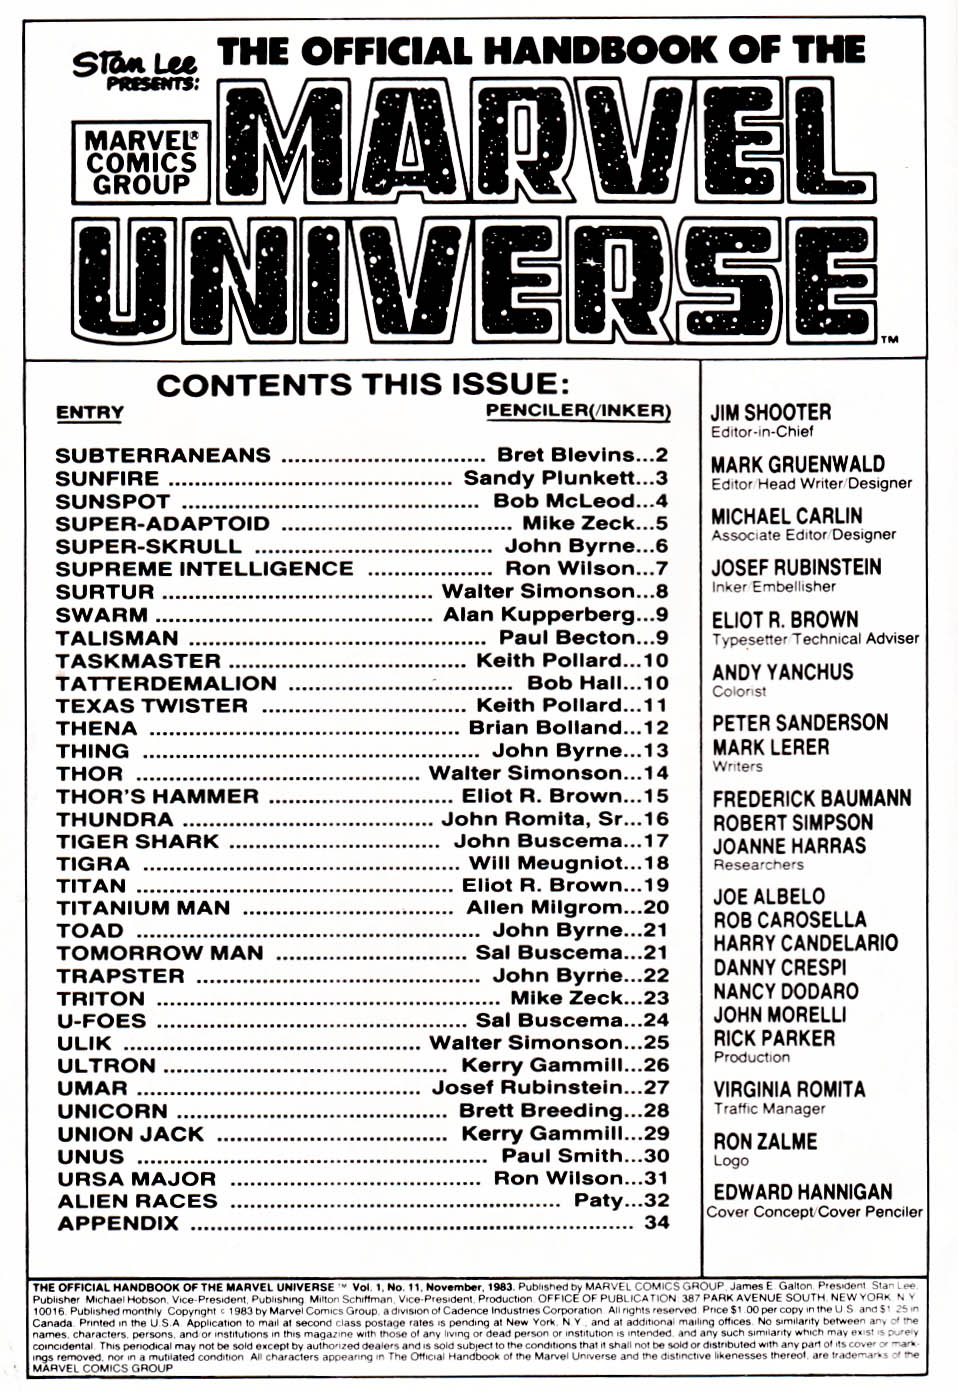 Read online The Official Handbook of the Marvel Universe comic -  Issue #11 - 2